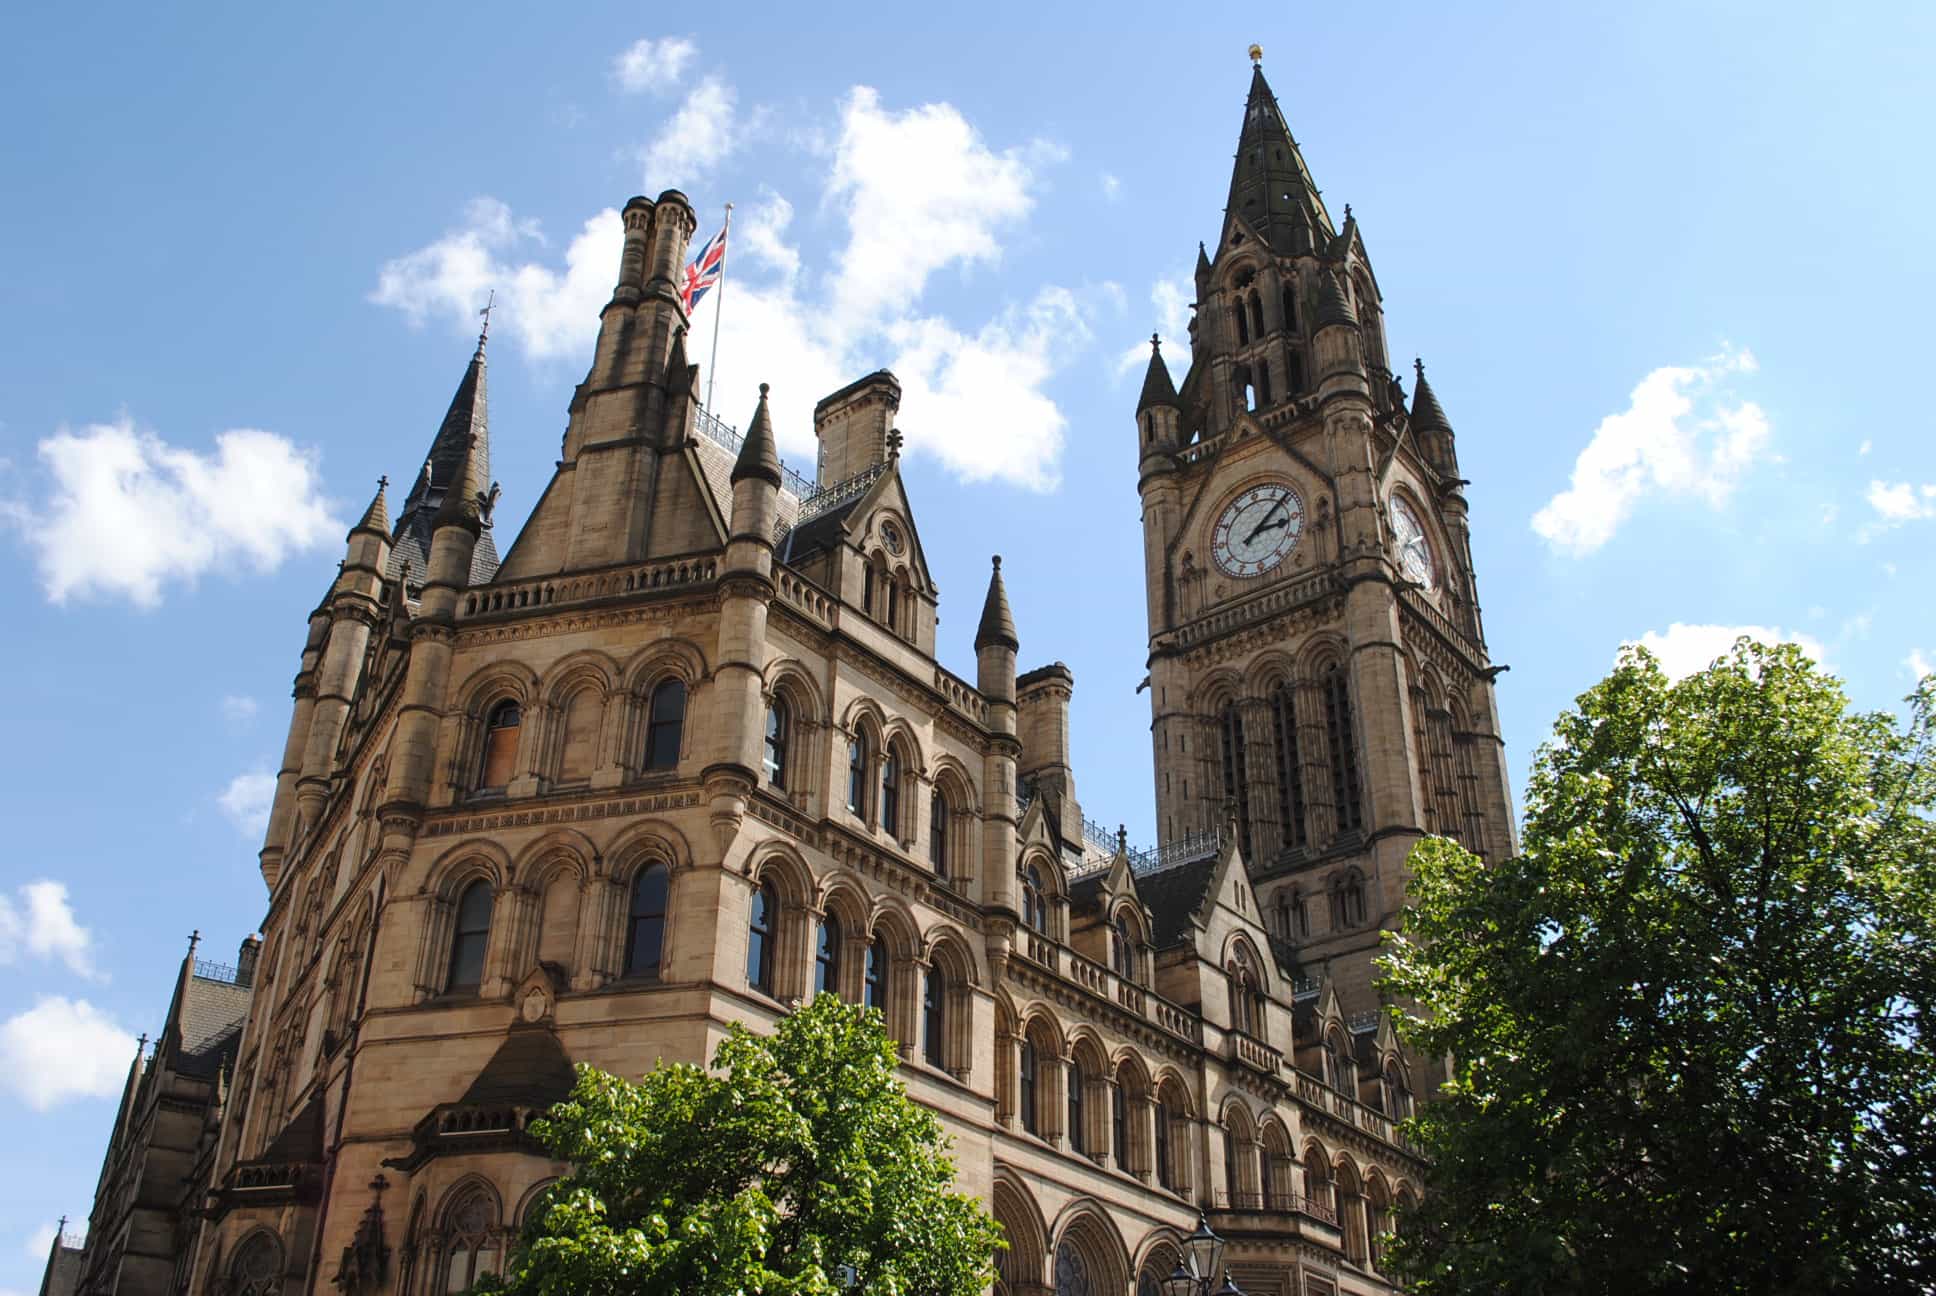 Manchester town hall